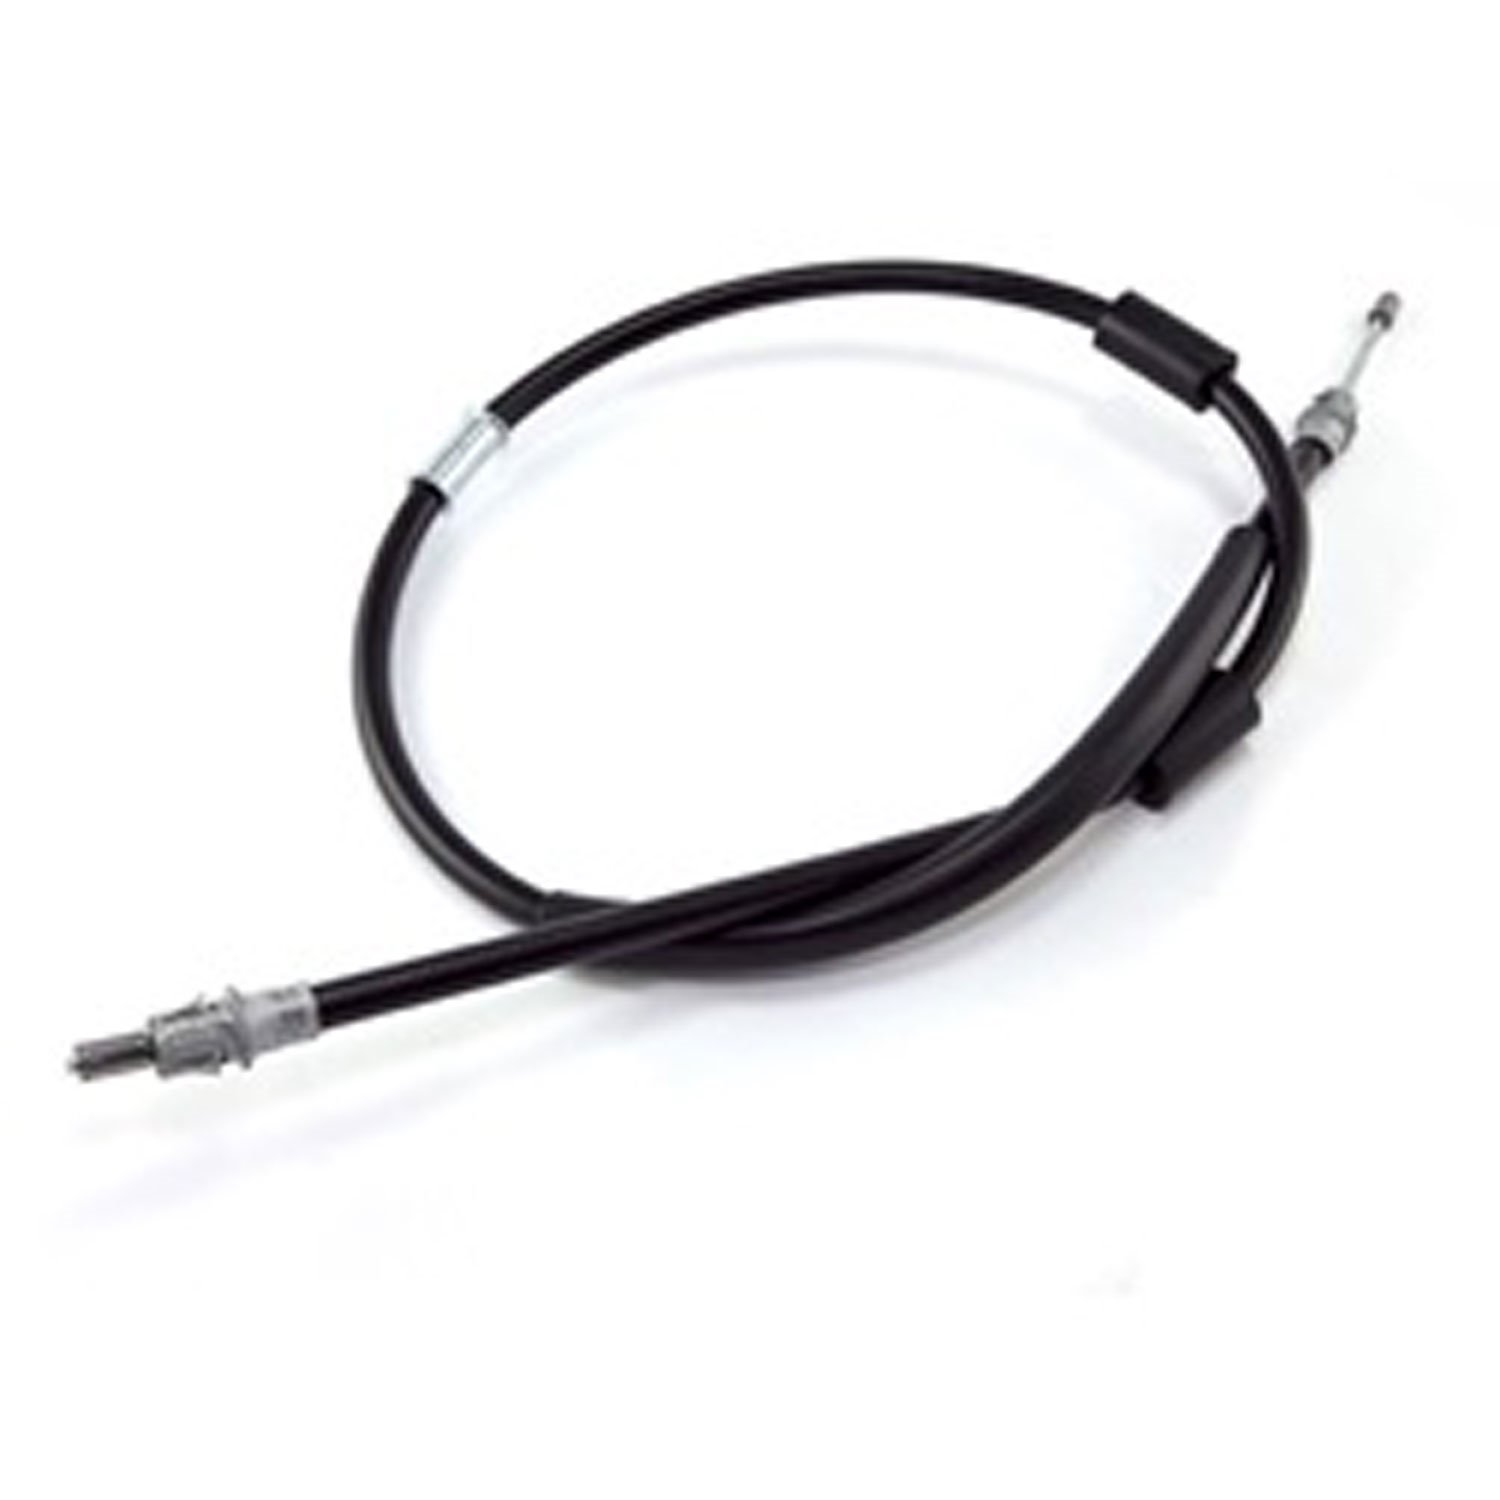 This front parking brake cable from Omix-ADA connects the pedal to the equalizer on 1991-1995 Jeep Wranglers.